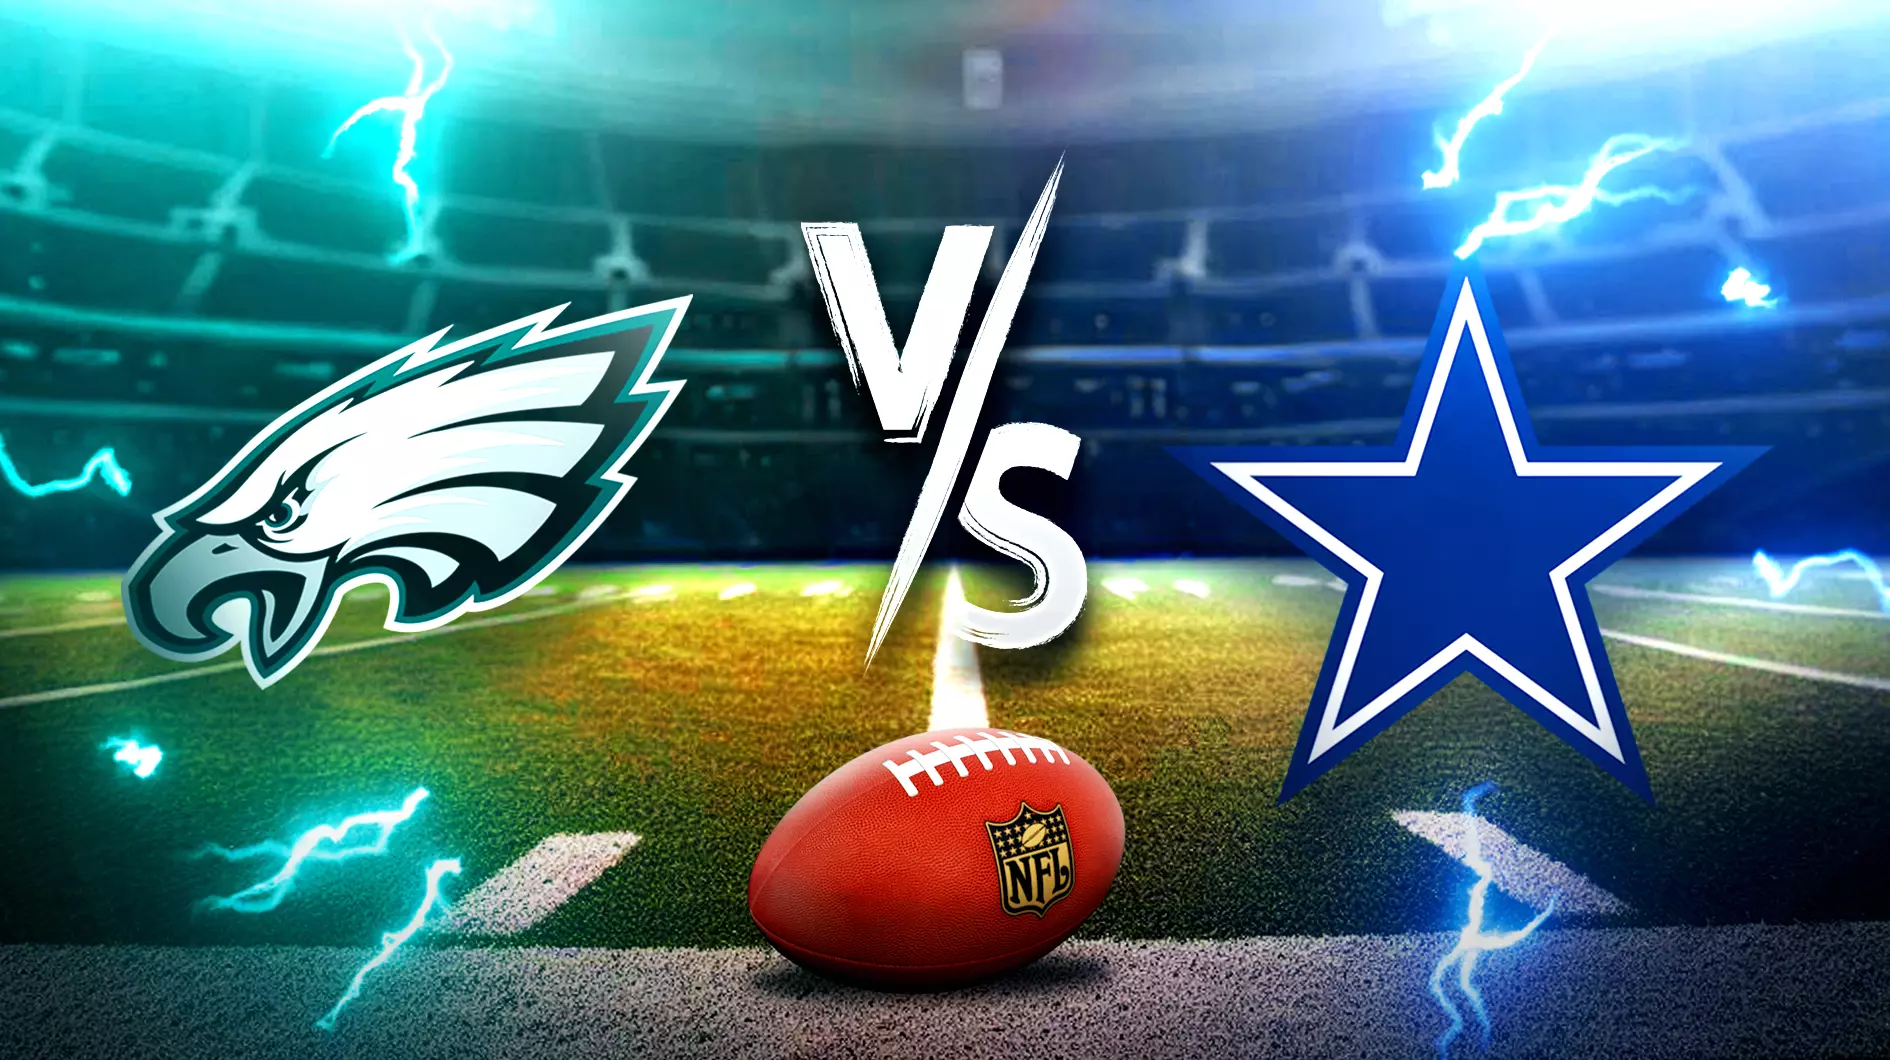 EaglesCowboys prediction, odds, pick, how to watch NFL Week 14 game